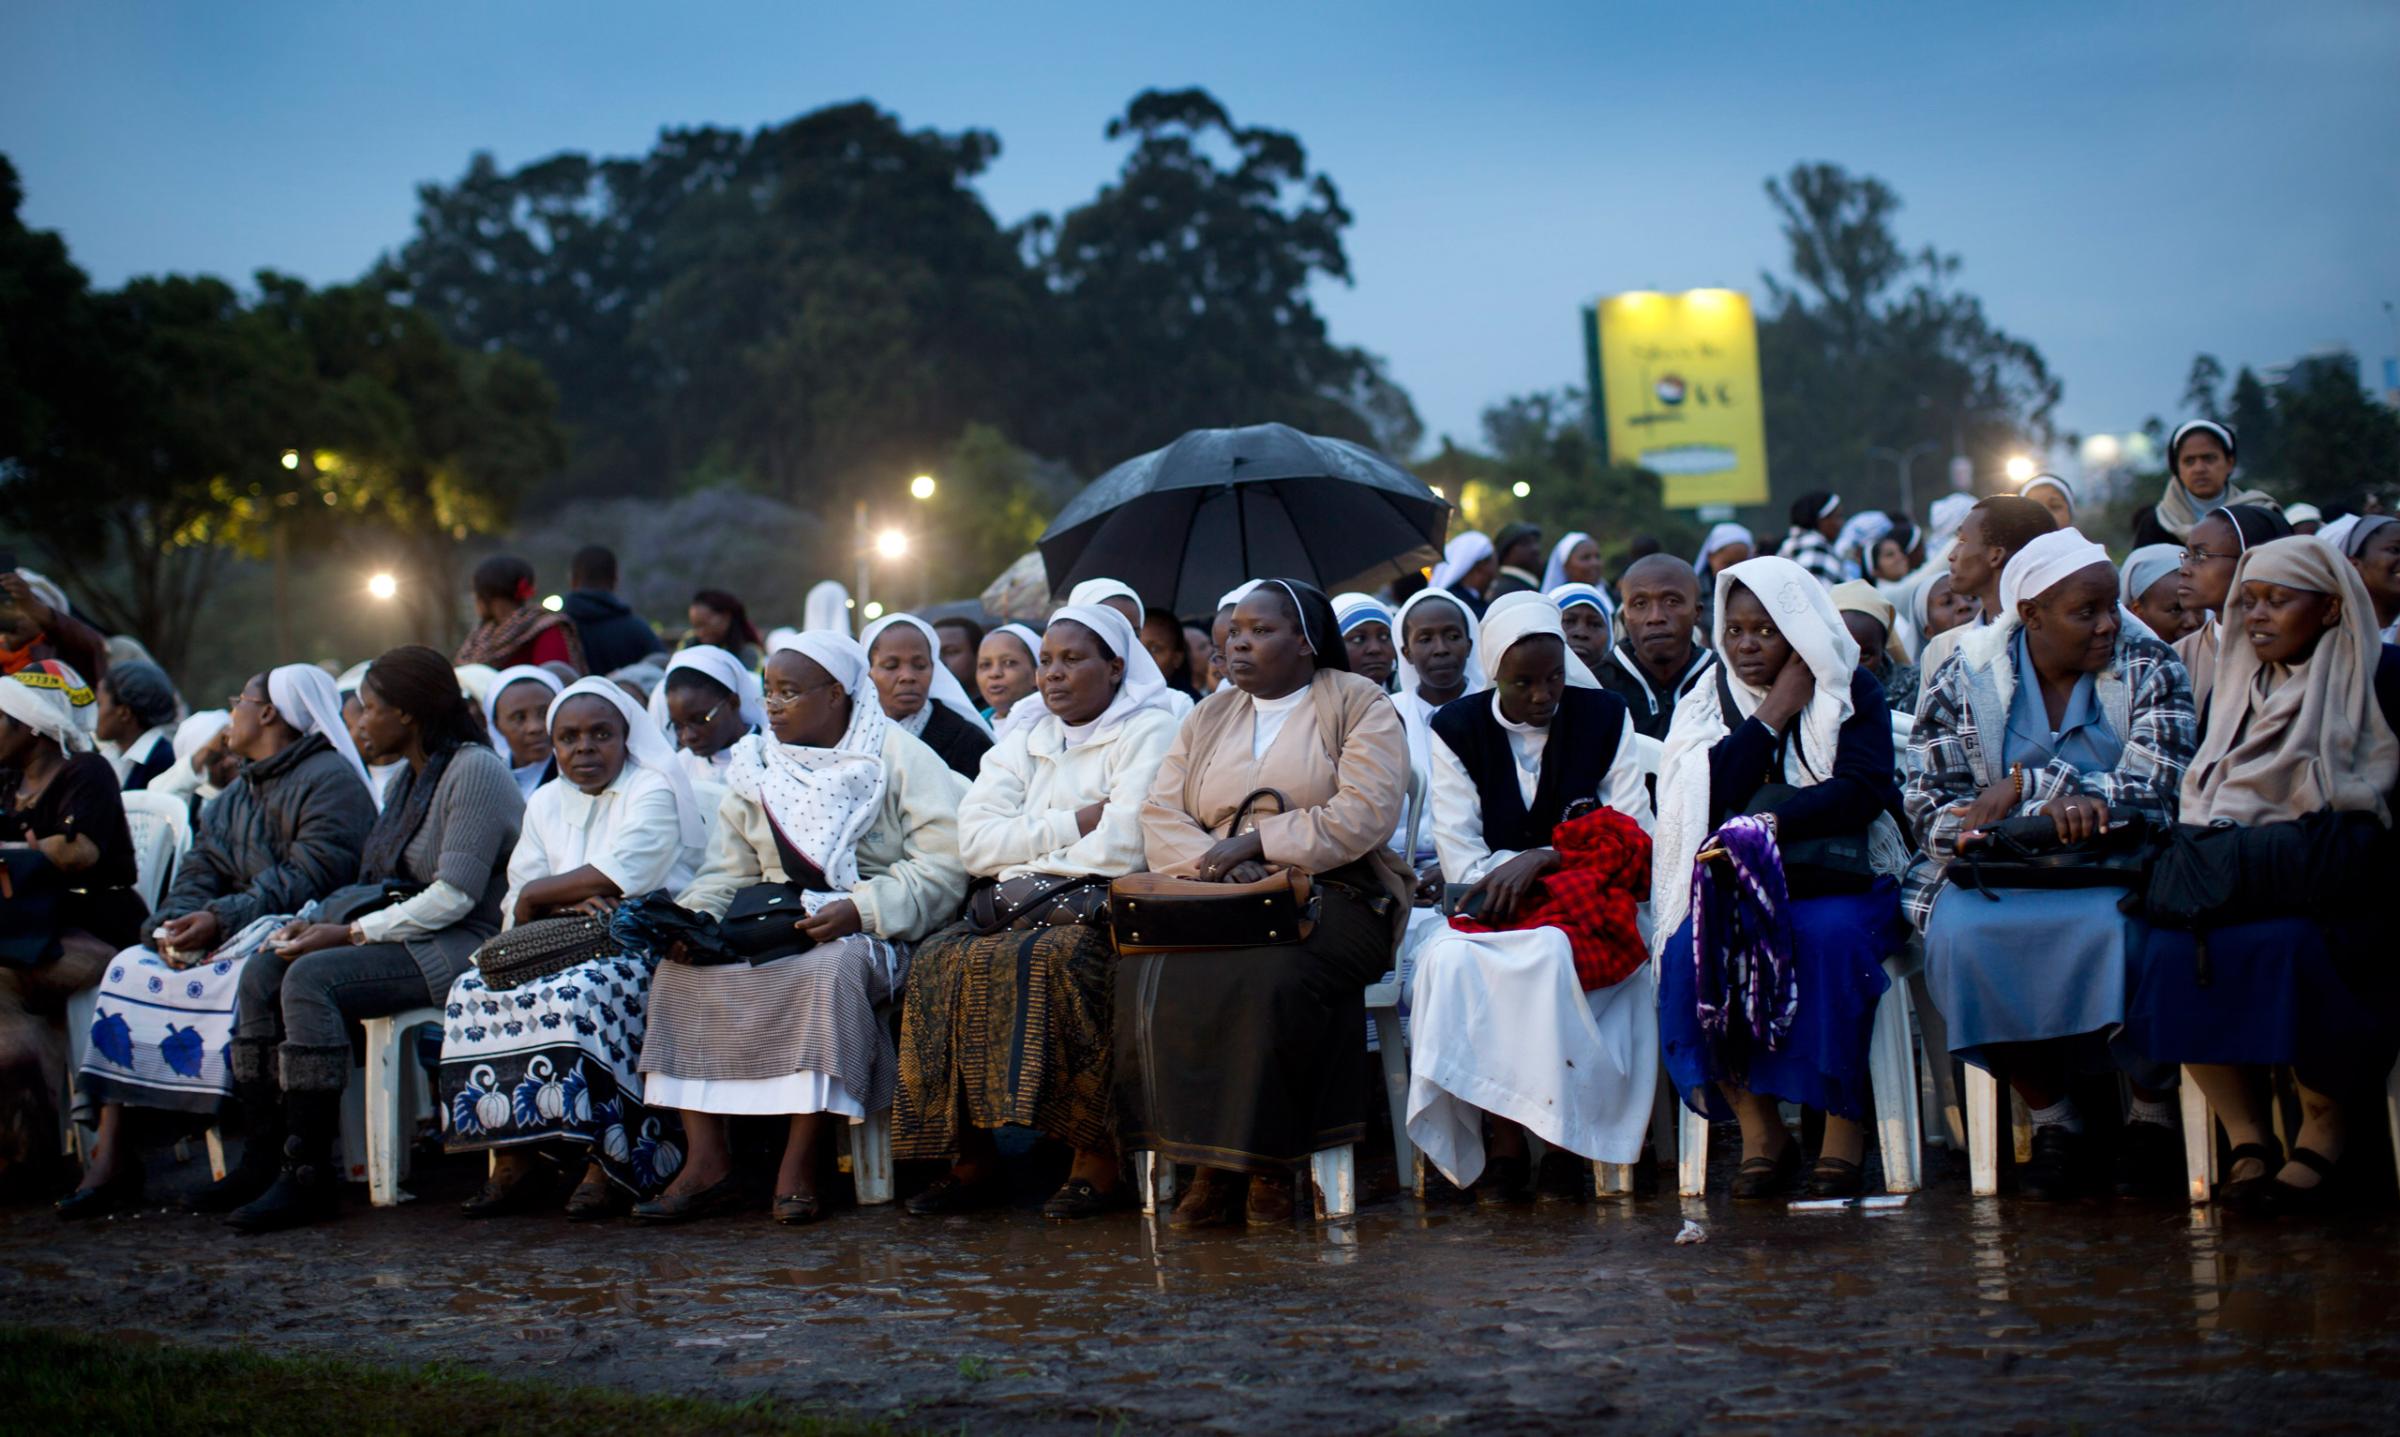 Catholic sisters wait just after dawn in the rain and mud to attend a Mass to be given by Pope Francis at the campus of the University of Nairobi in Kenya Thursday, Nov. 26, 2015. Pope Francis is in Kenya on his first-ever trip to Africa, a six-day pilgrimage that will also take him to Uganda and the Central African Republic. (AP Photo/Ben Curtis)